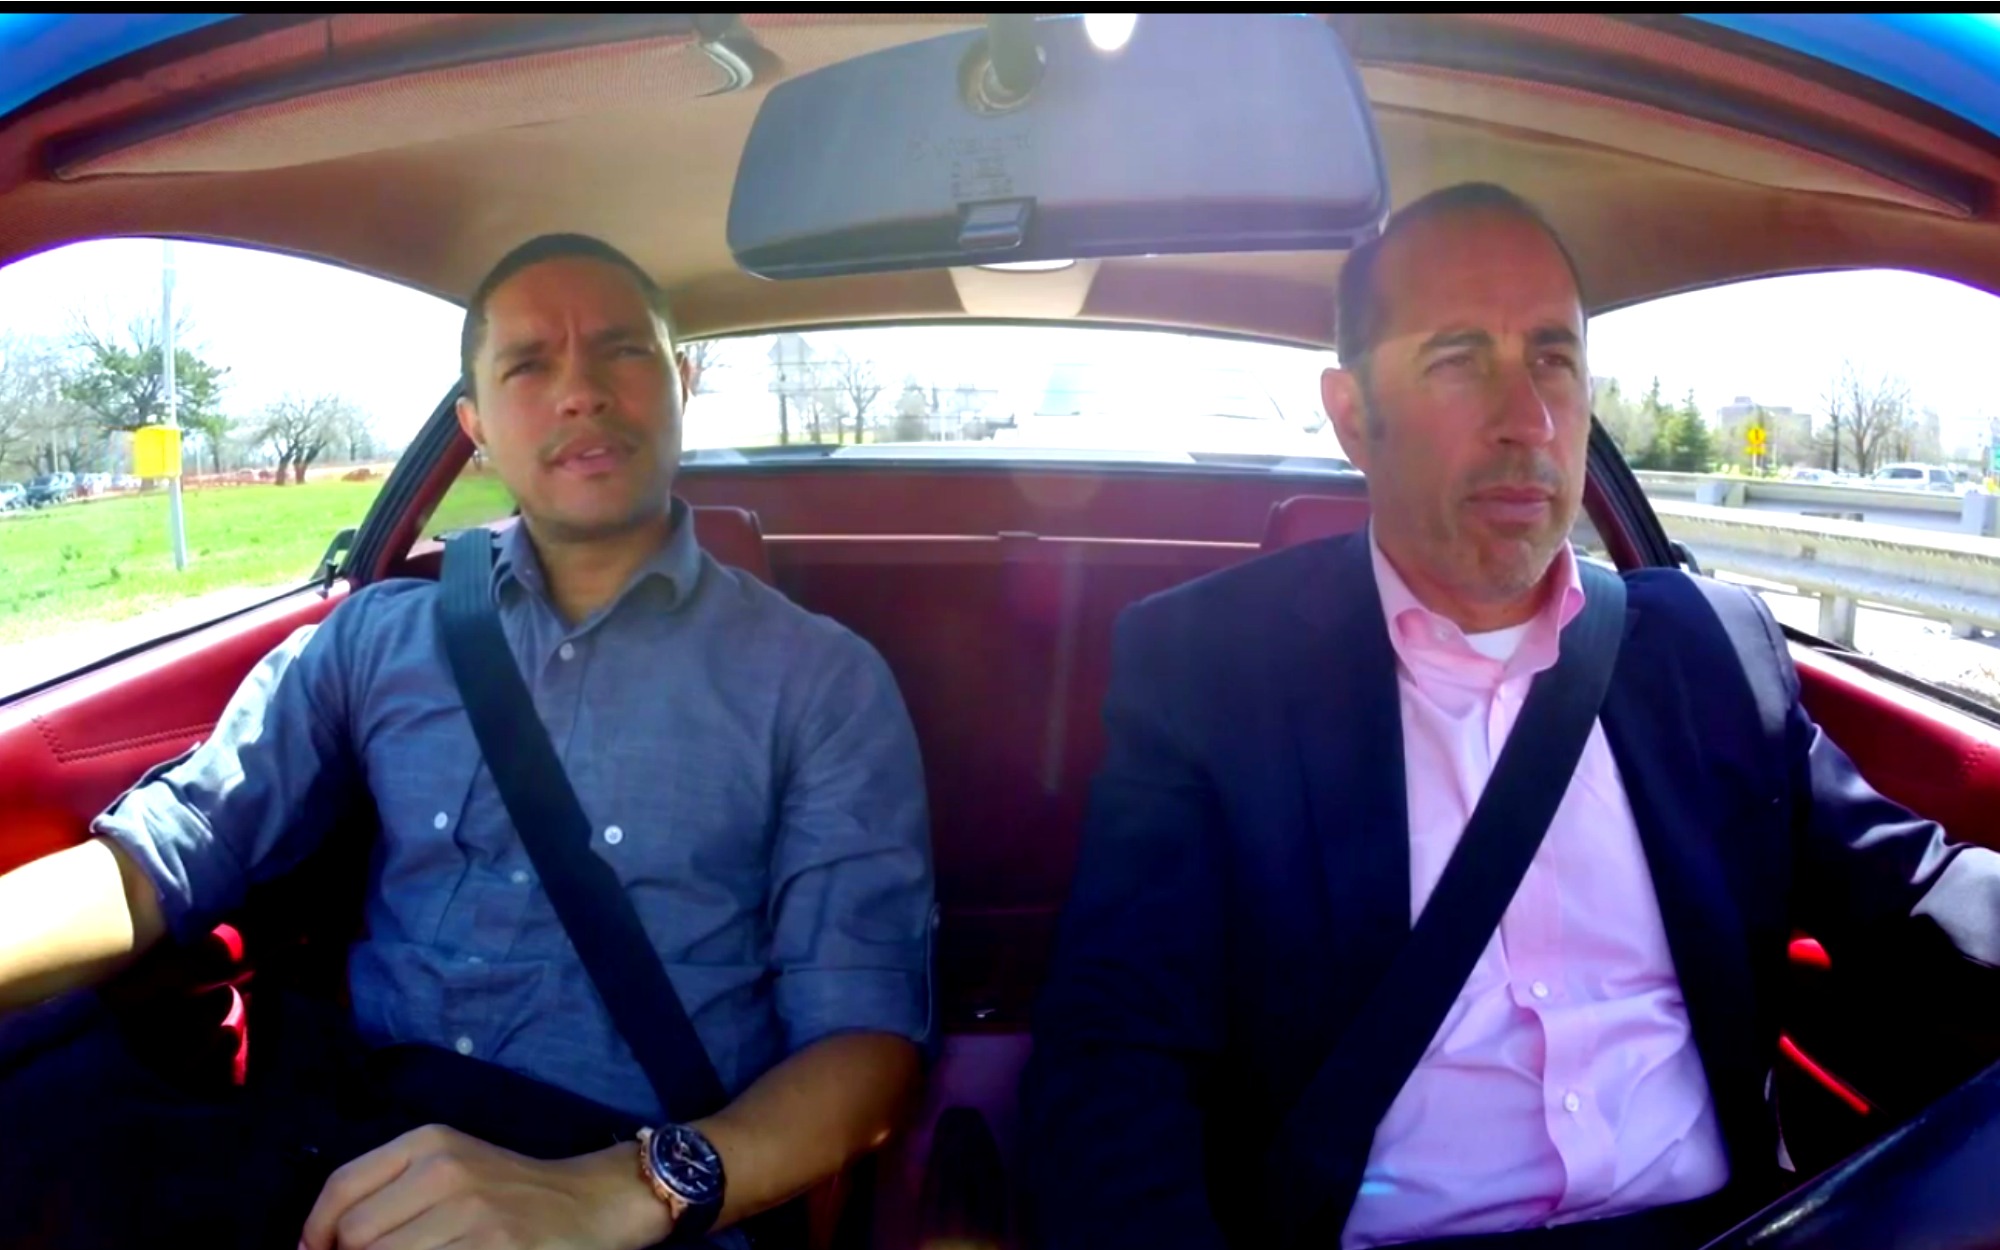 Still image from Comedians in Cars Getting Coffee/Crackle